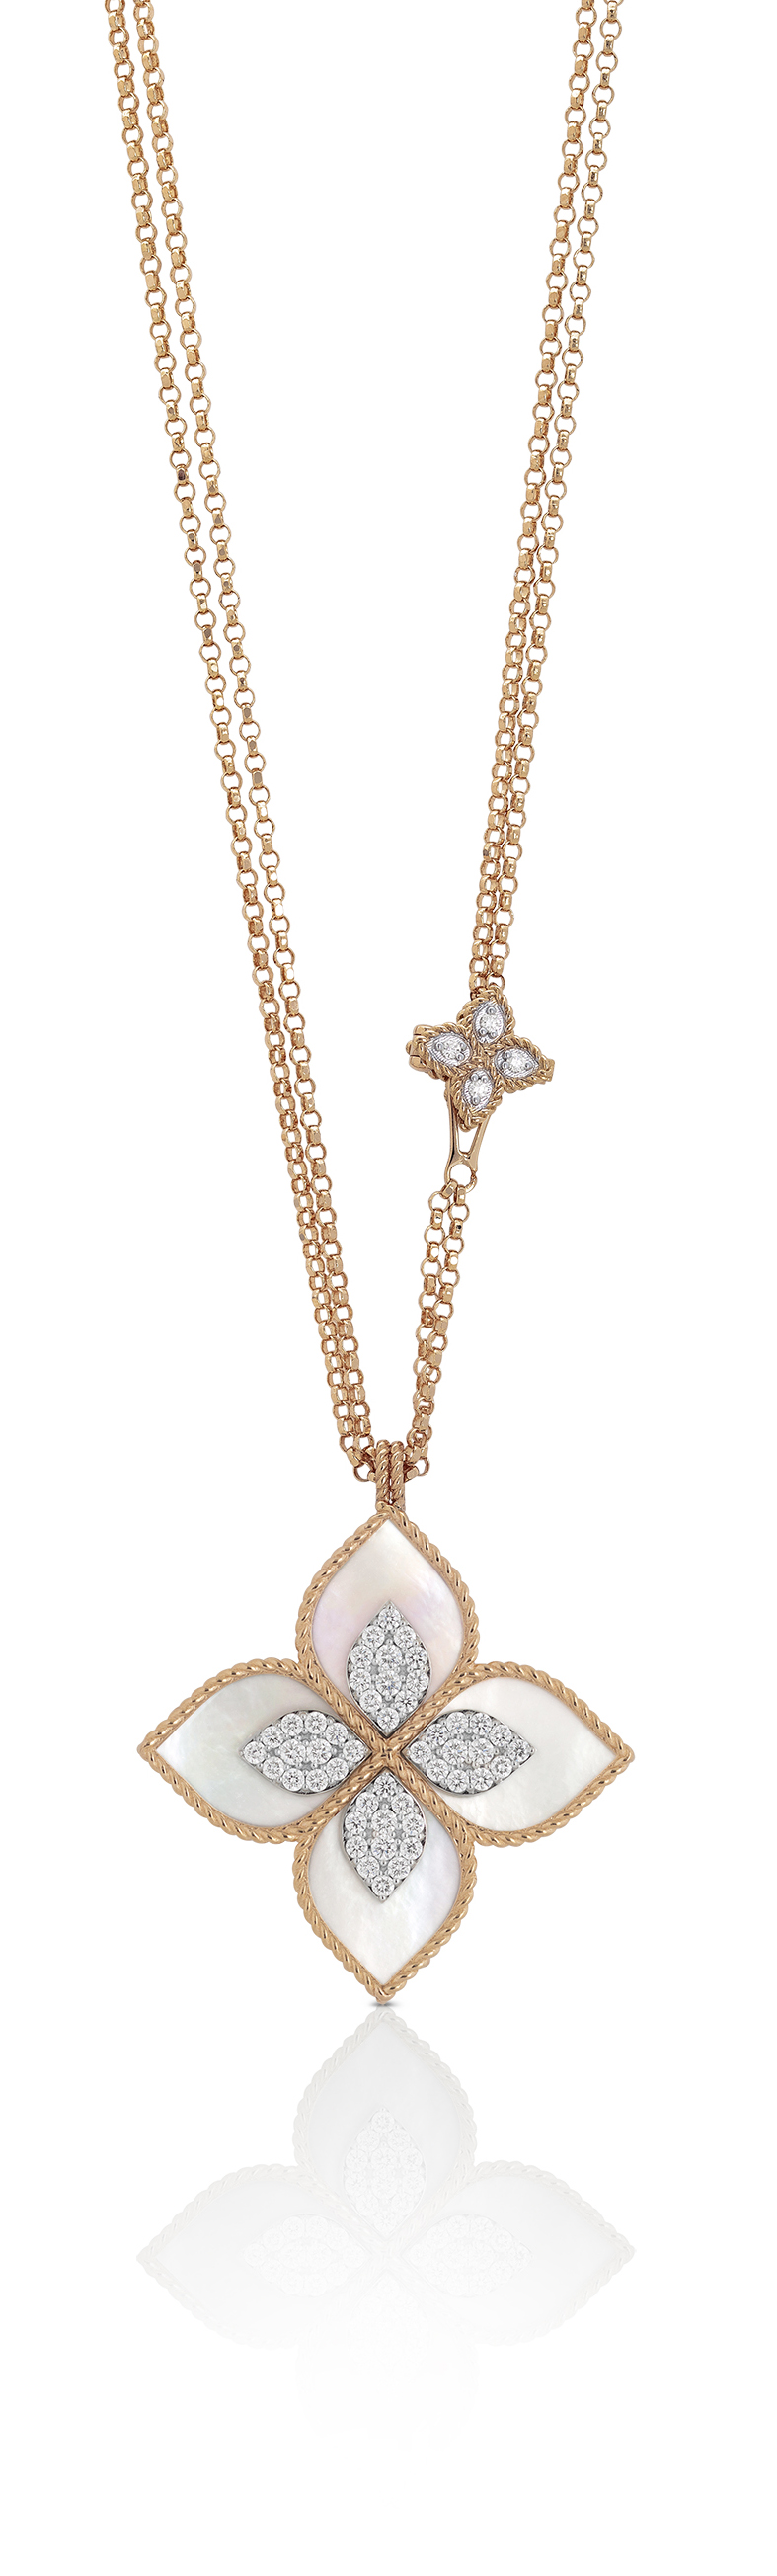 JUWELIER KRUZIK_Roberto Coin_Kollektion Princess Flower_Transformable necklace_bracelet rose gold with mother of pearl and diamonds_Preis auf Anfrage